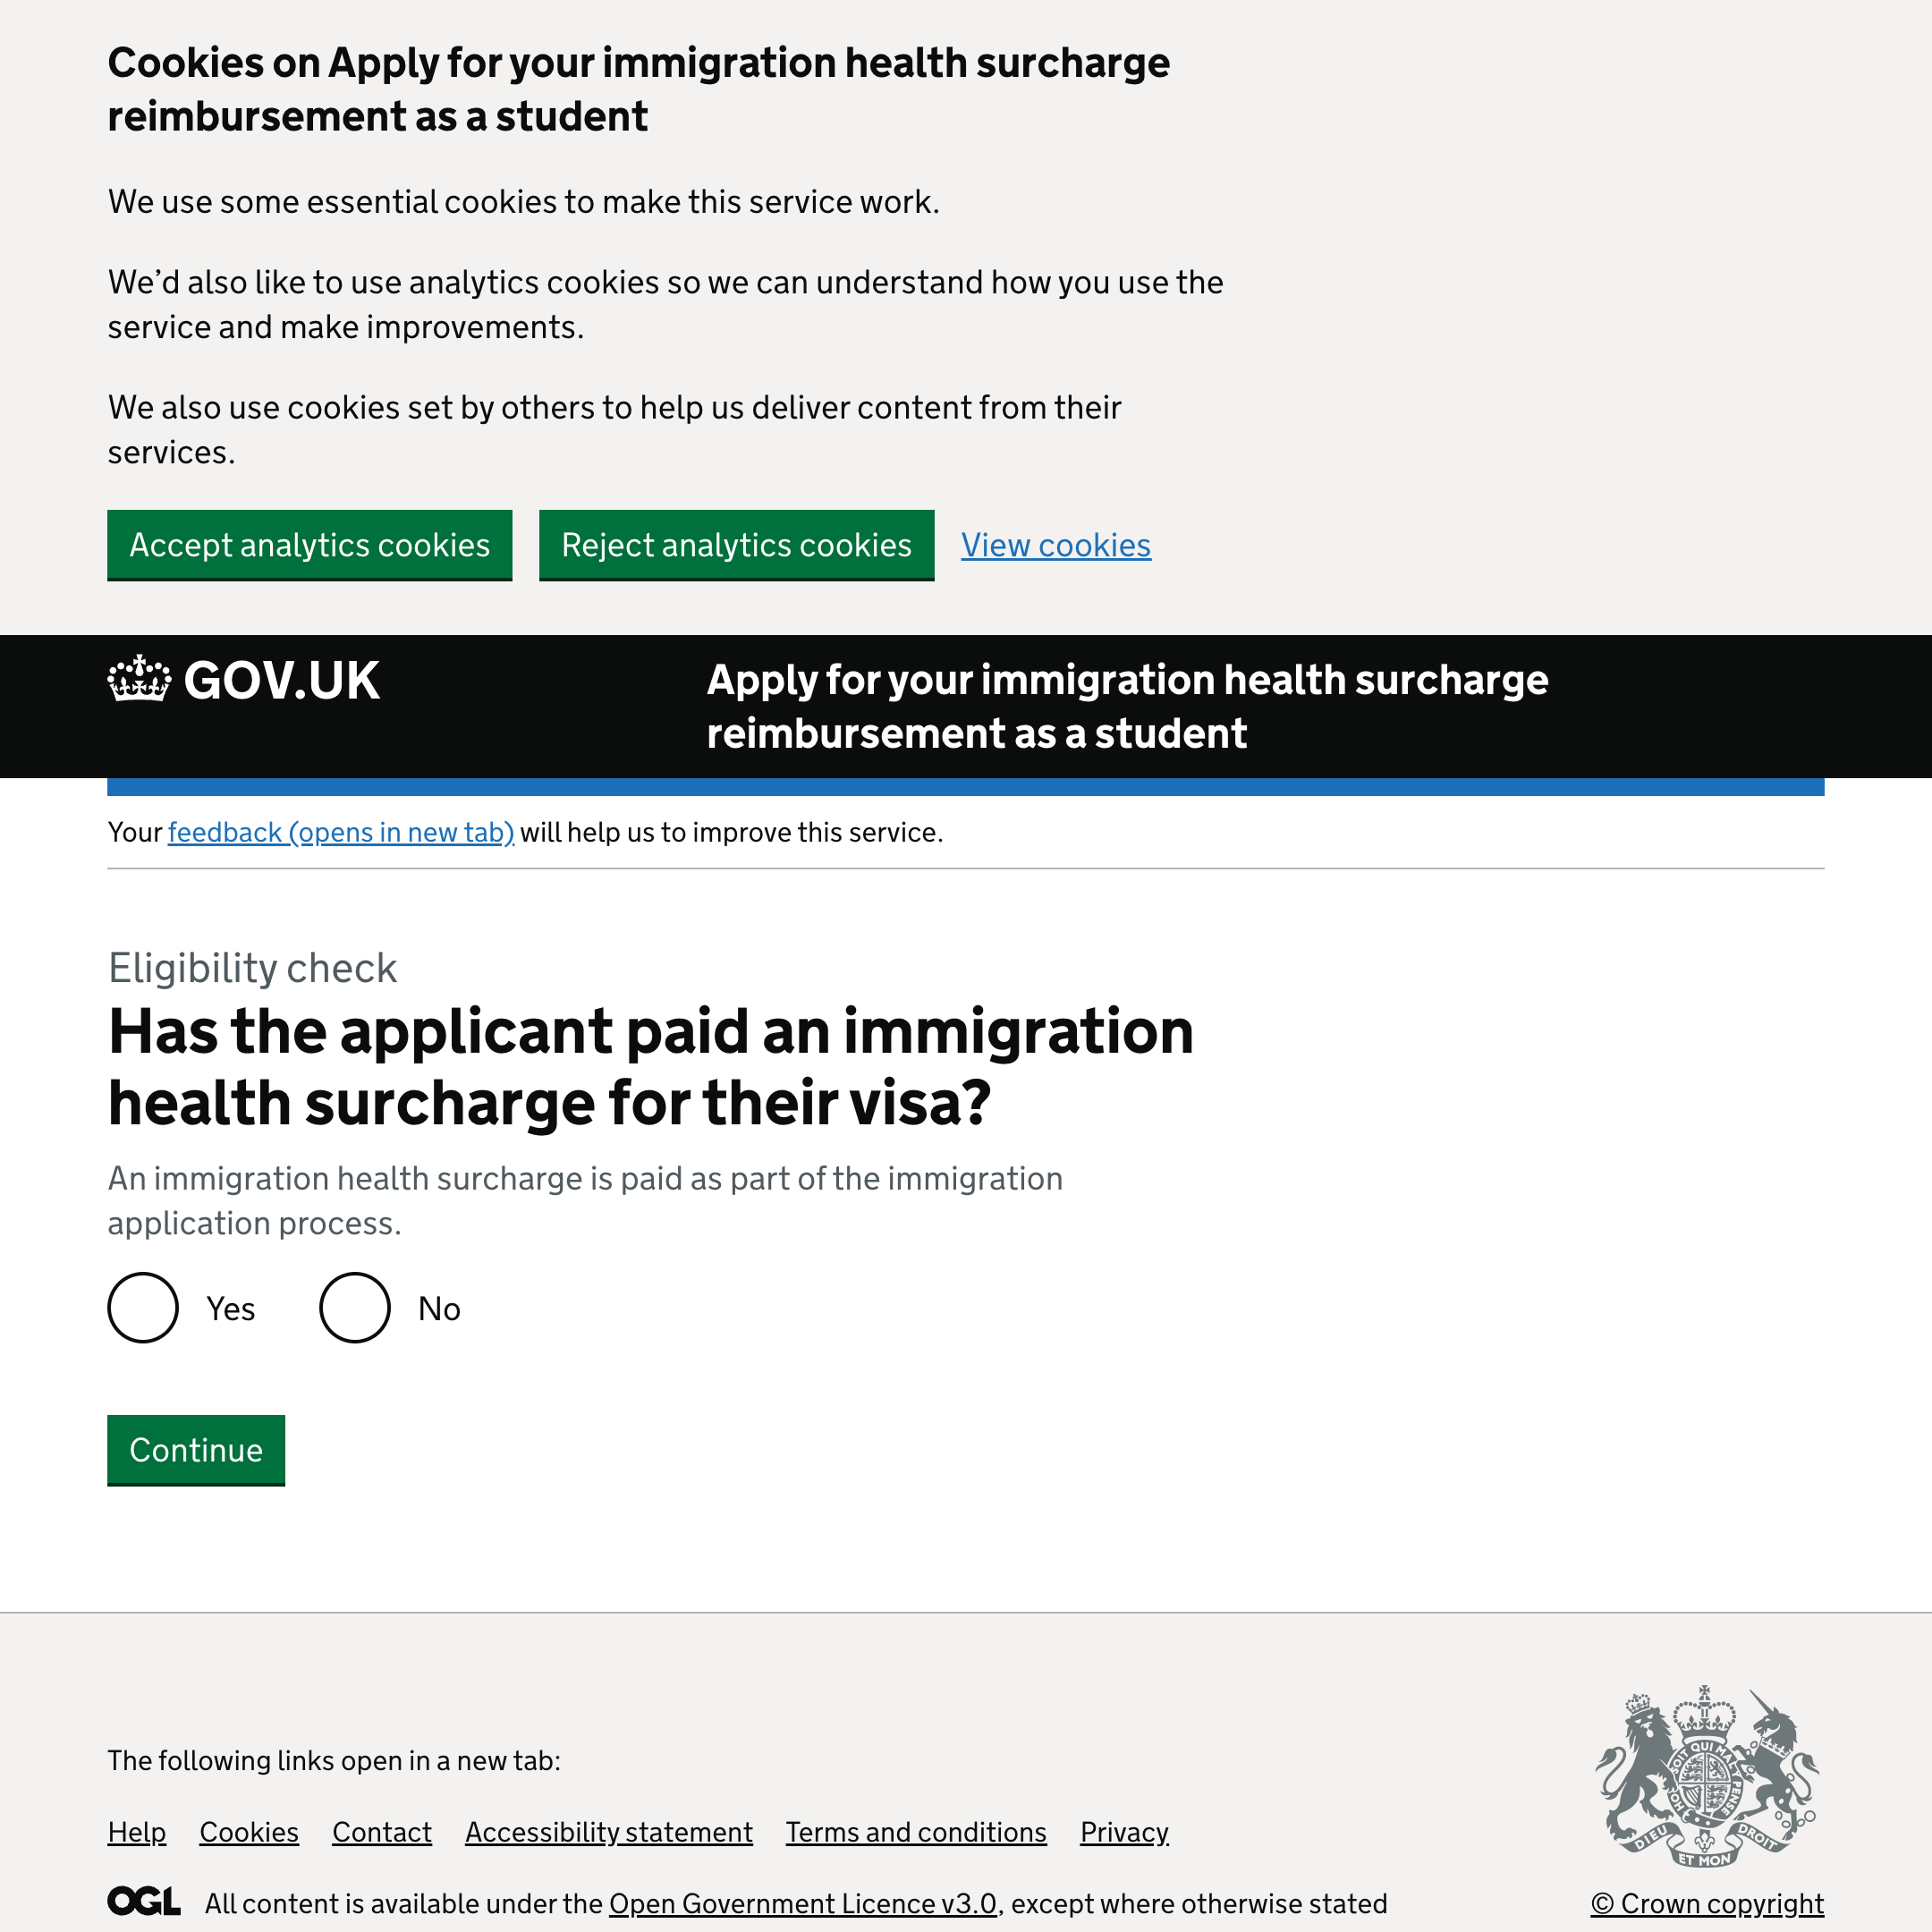 Apply for your immigration health surcharge reimbursement as a student